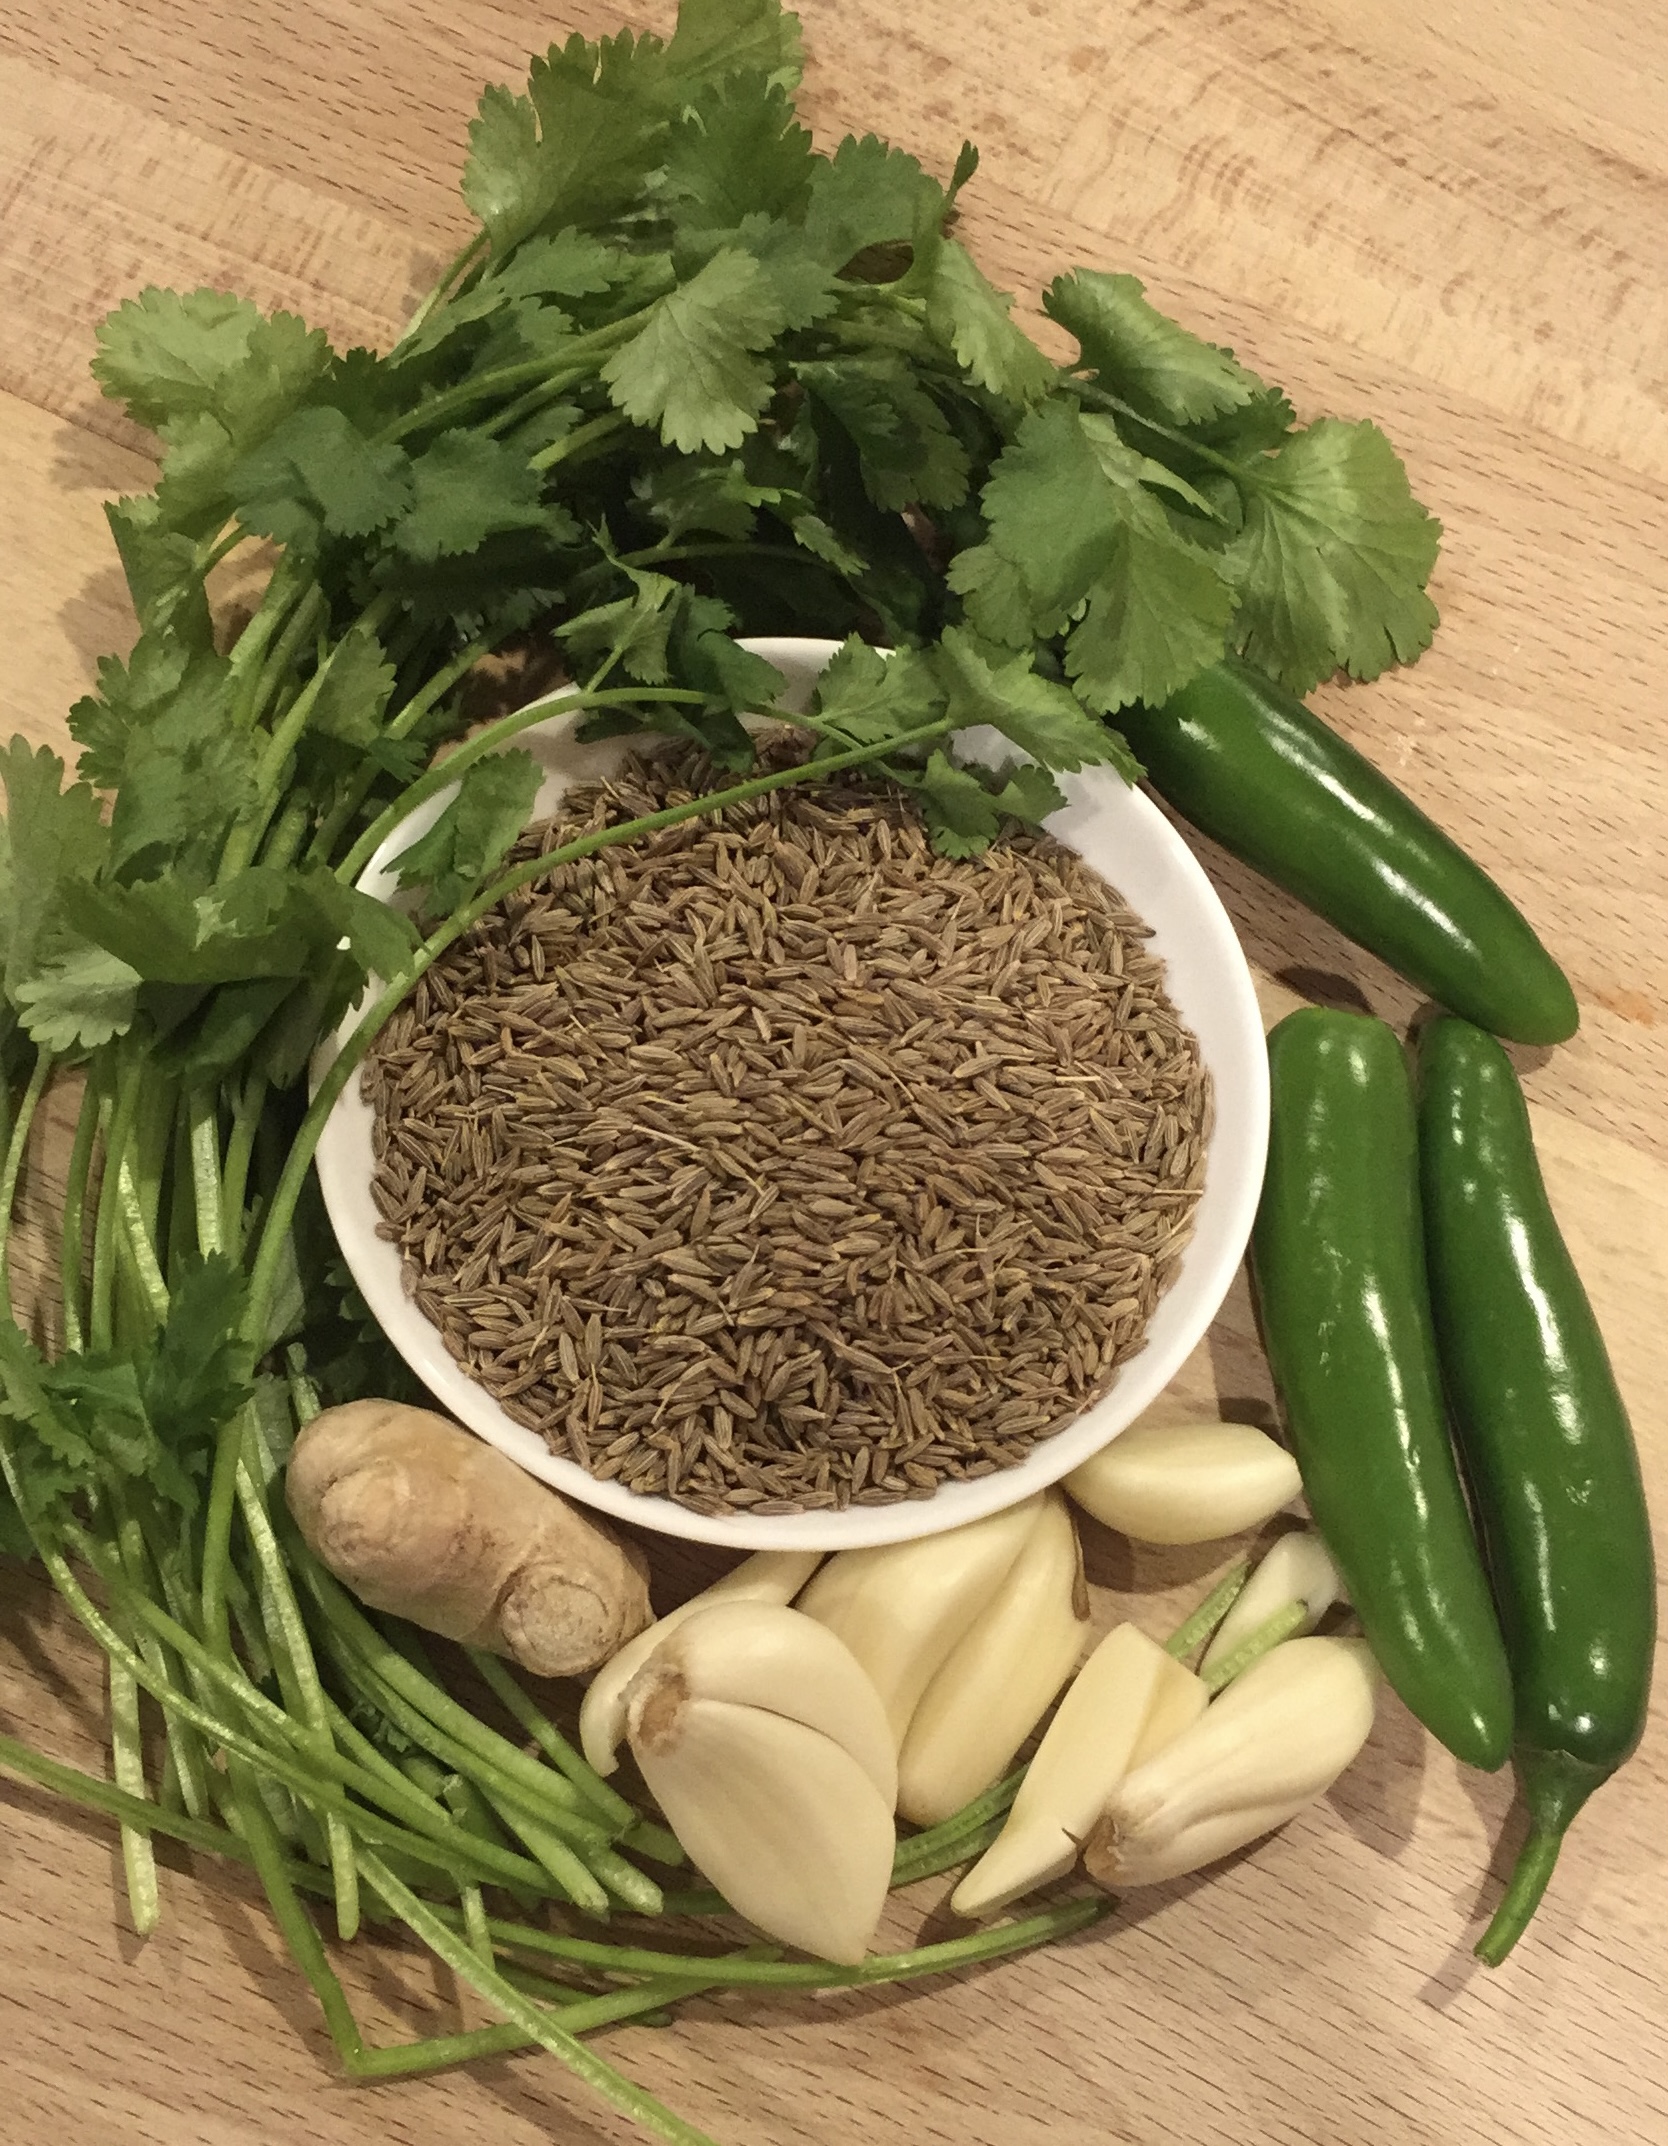 chutney ingredients for zhoug sauce. cilantro, cumin seeds, garlic, ginger, and chili peppers in a picture.